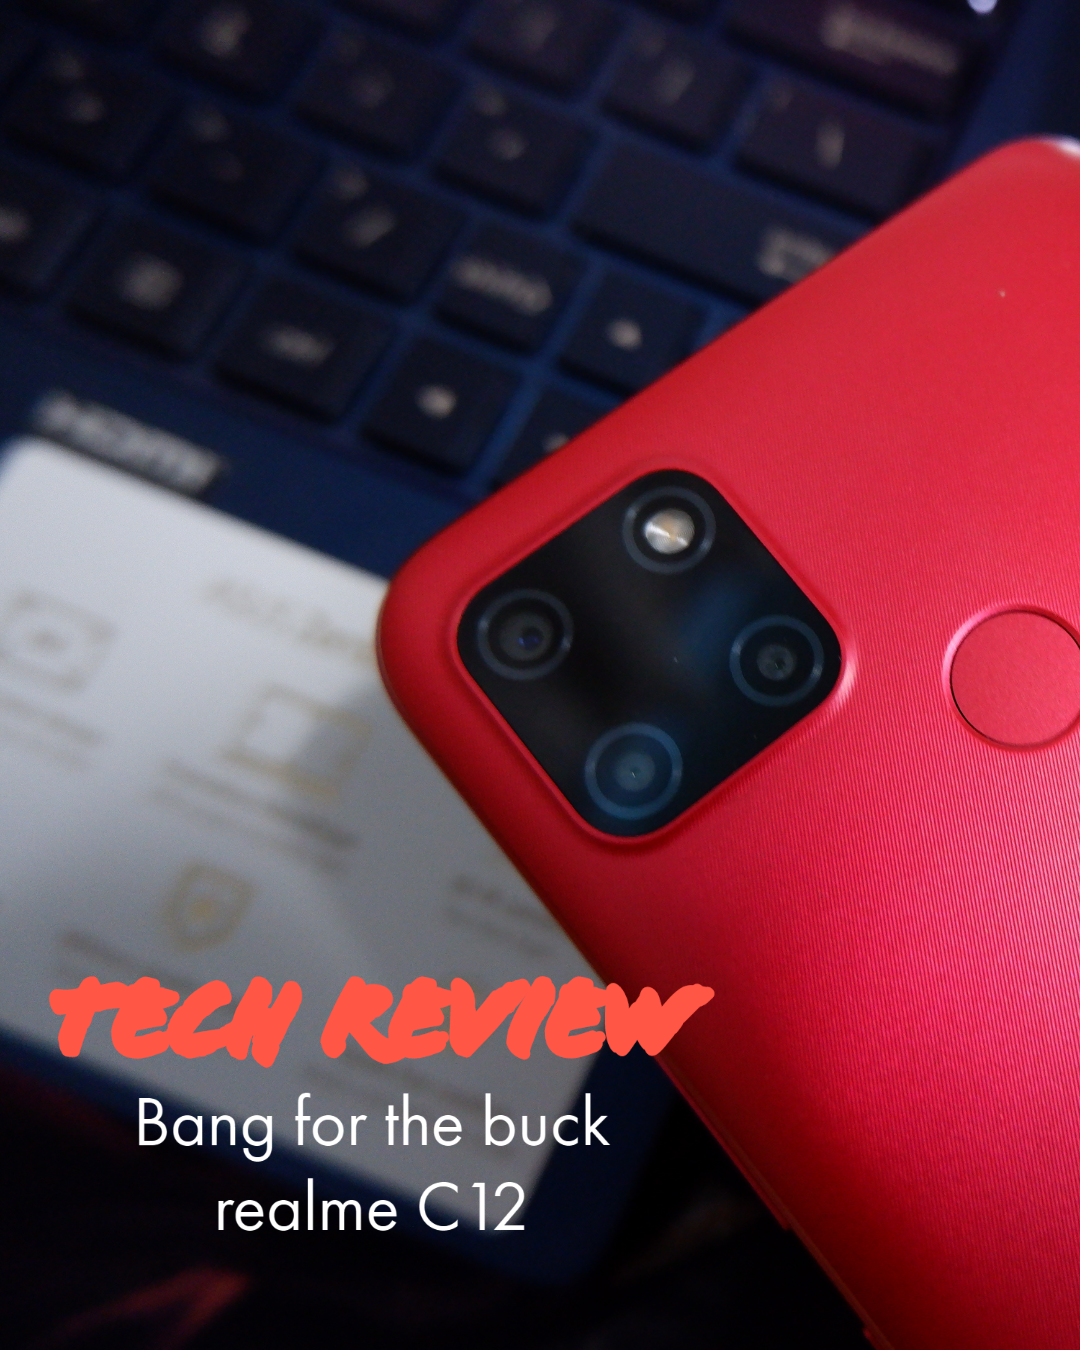 Tech review: Bang for the buck realme C12